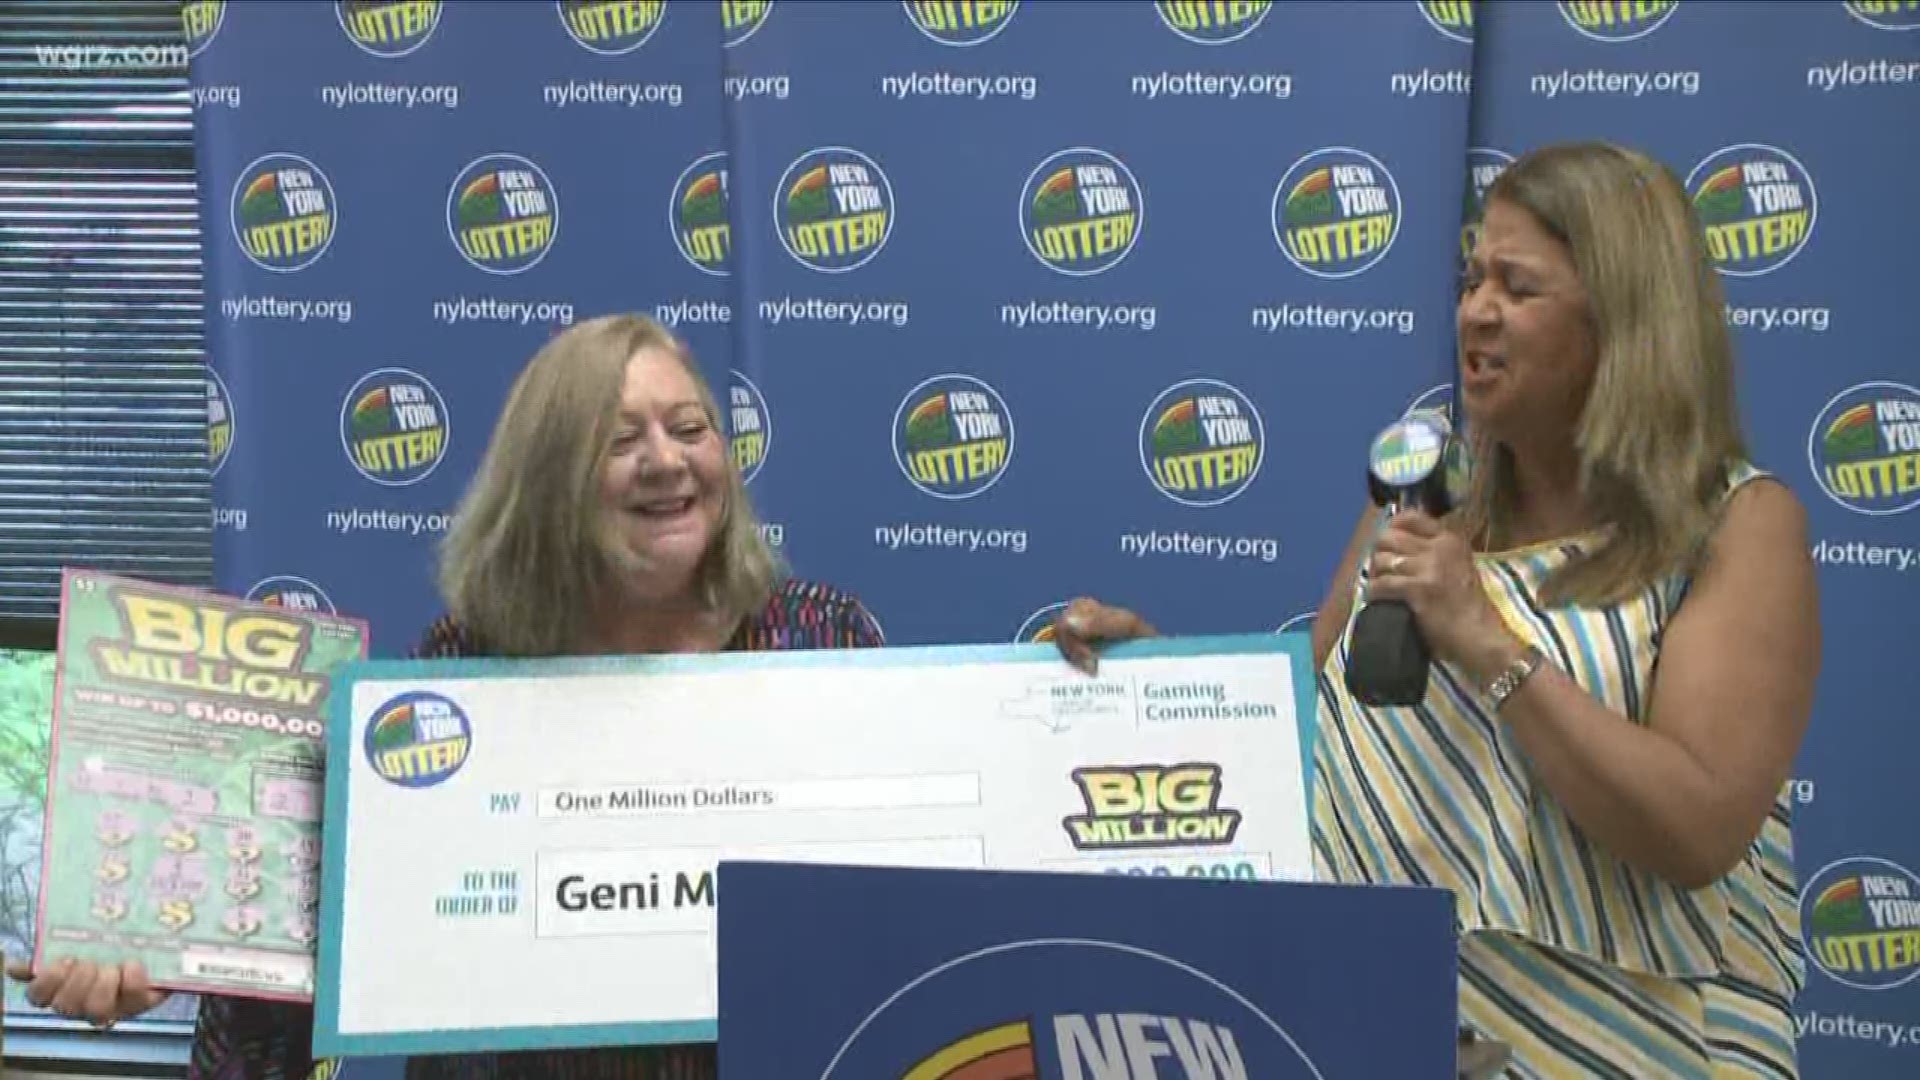 That'd be 62-year-old Geni (genie) Miller, who got the big check from Yolanda Vega today